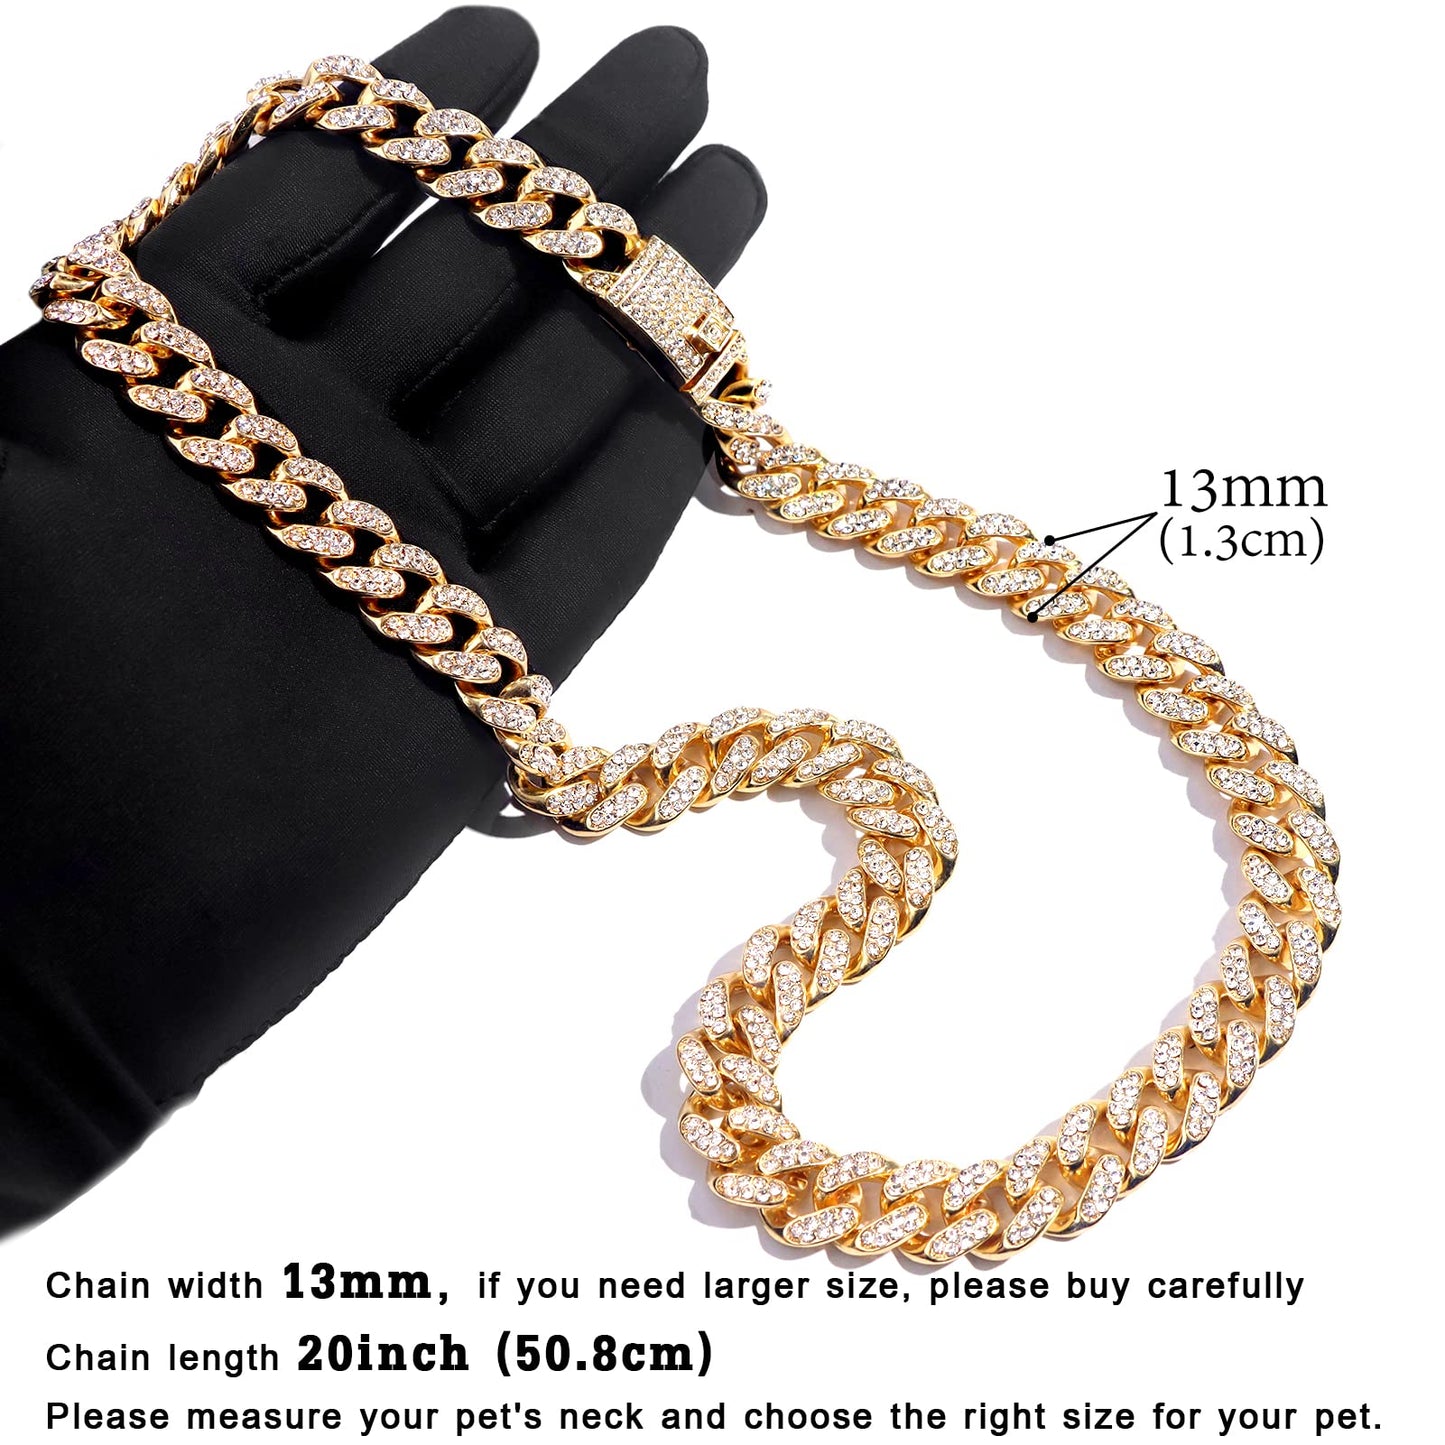 Cuban Link Dog Collar Gold Silver Color Metal Chain Diamond Pet Collars for Dogs Cats Jewelry 8/10/14/16/18/20/24/28 Inch (16inch, Gold)